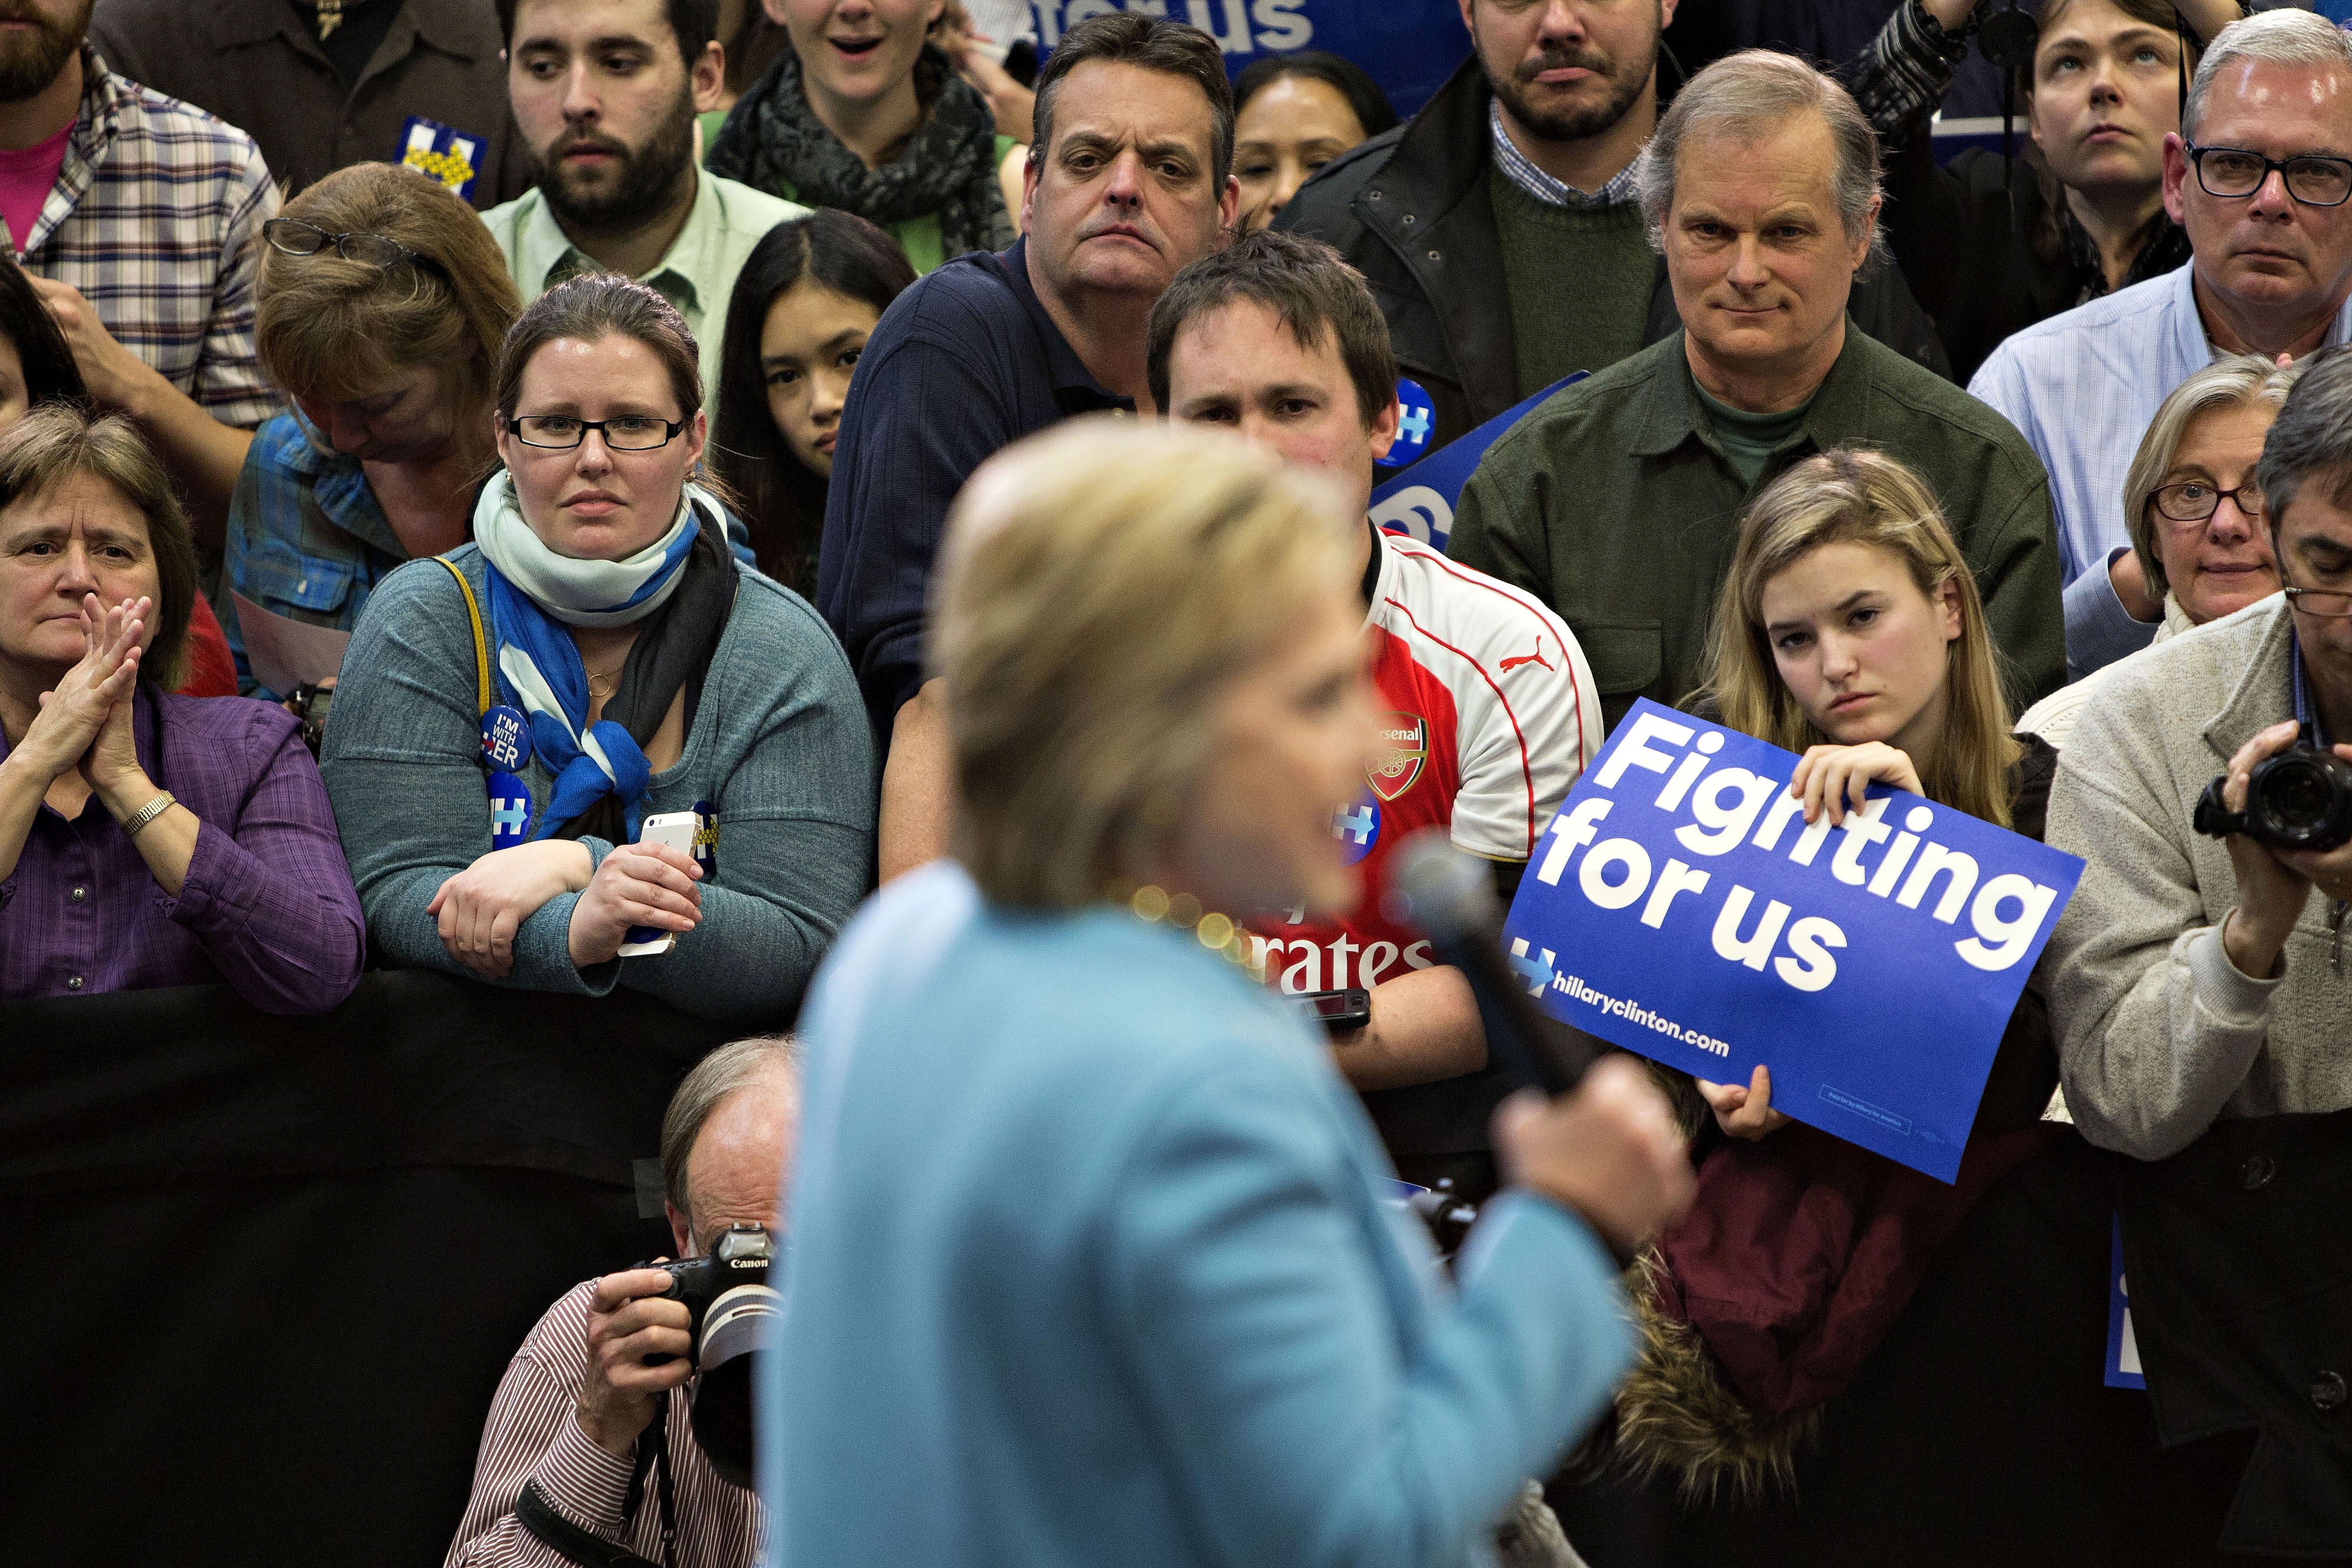 Attendees listen as Hillary Clinton, former Secretary of State and 2016 Democratic presidential candidate, speaks during a campaign event in Manchester, N.H., on Feb. 8, 2016 (Bloomberg/Getty Images)